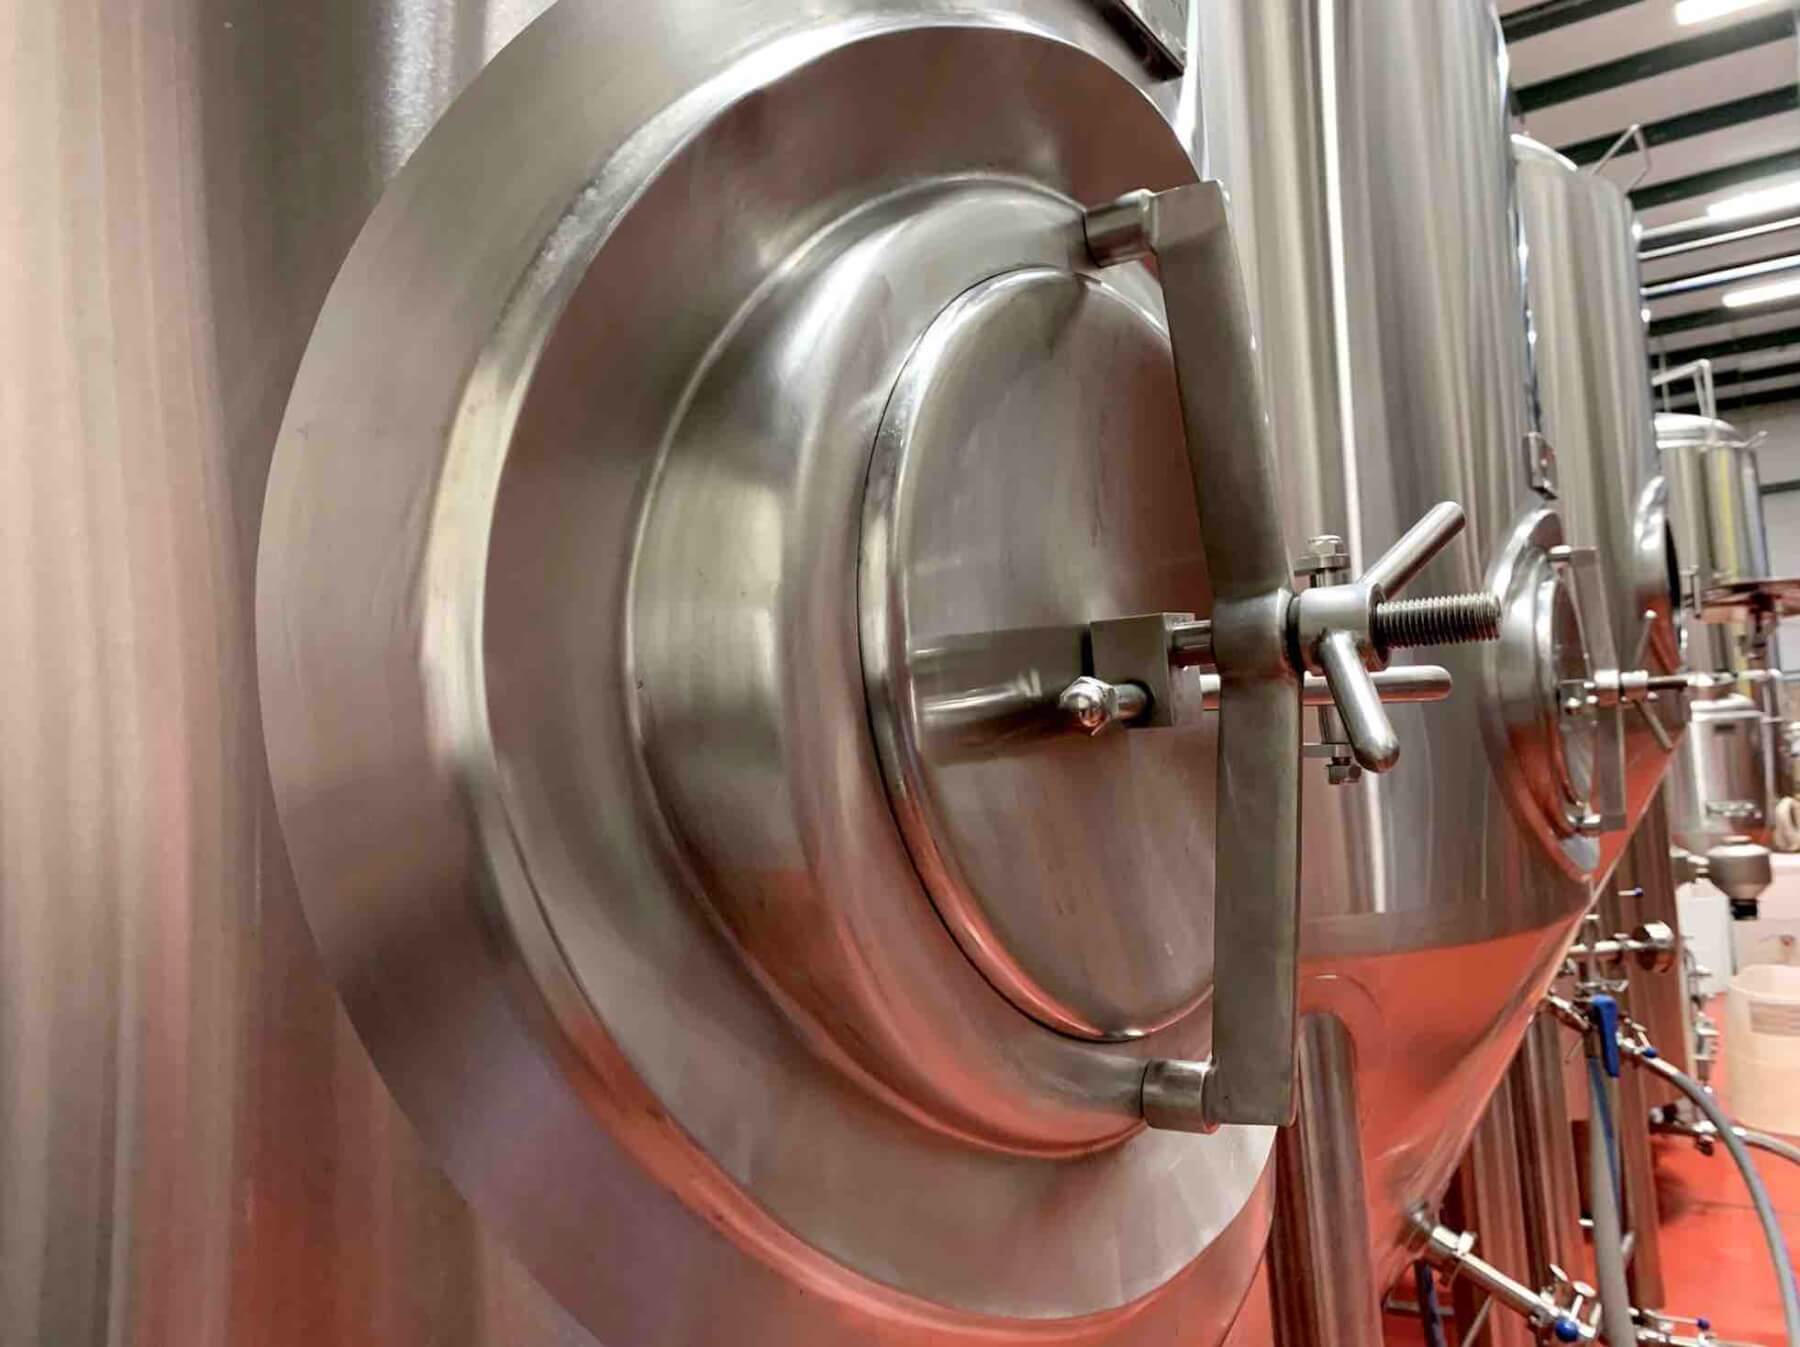 greenbrier valley brewing company west virginia made craft beer fermentation tanks at brewery